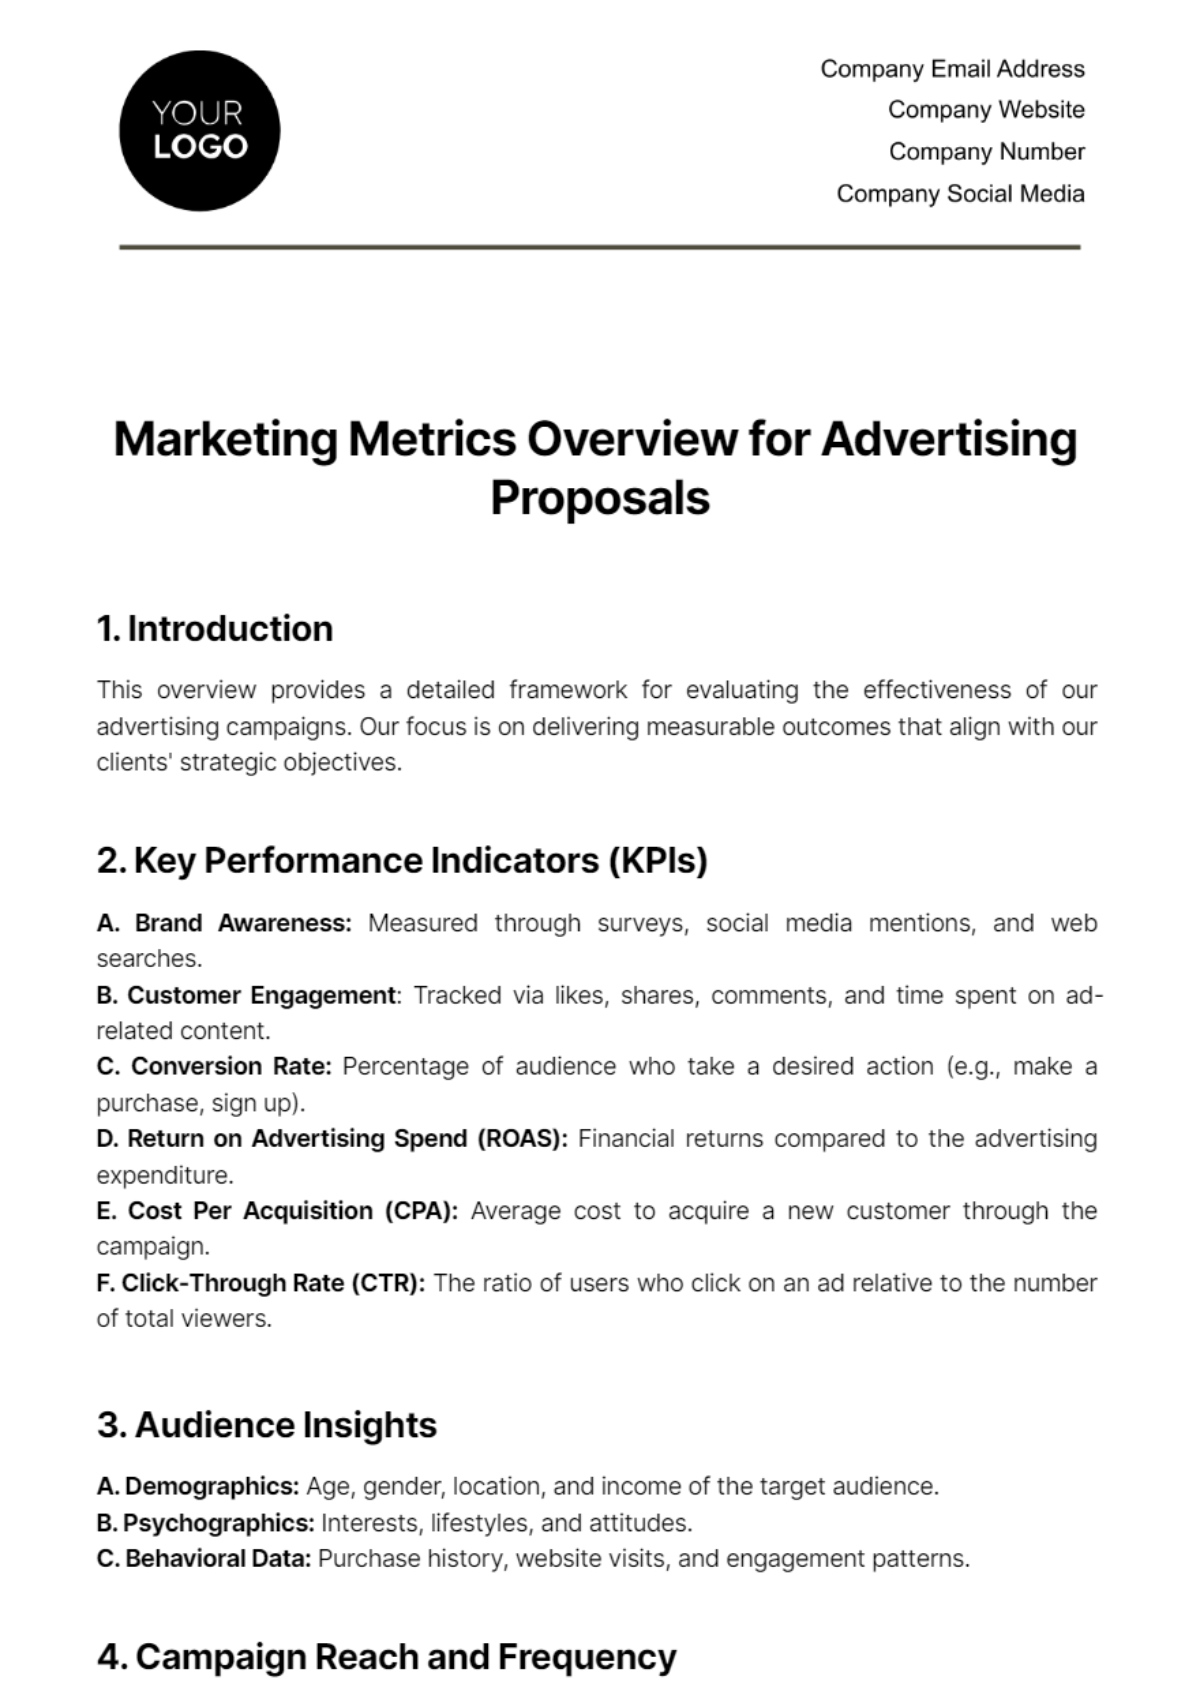 Free Marketing Metrics Overview for Advertising Proposals Template